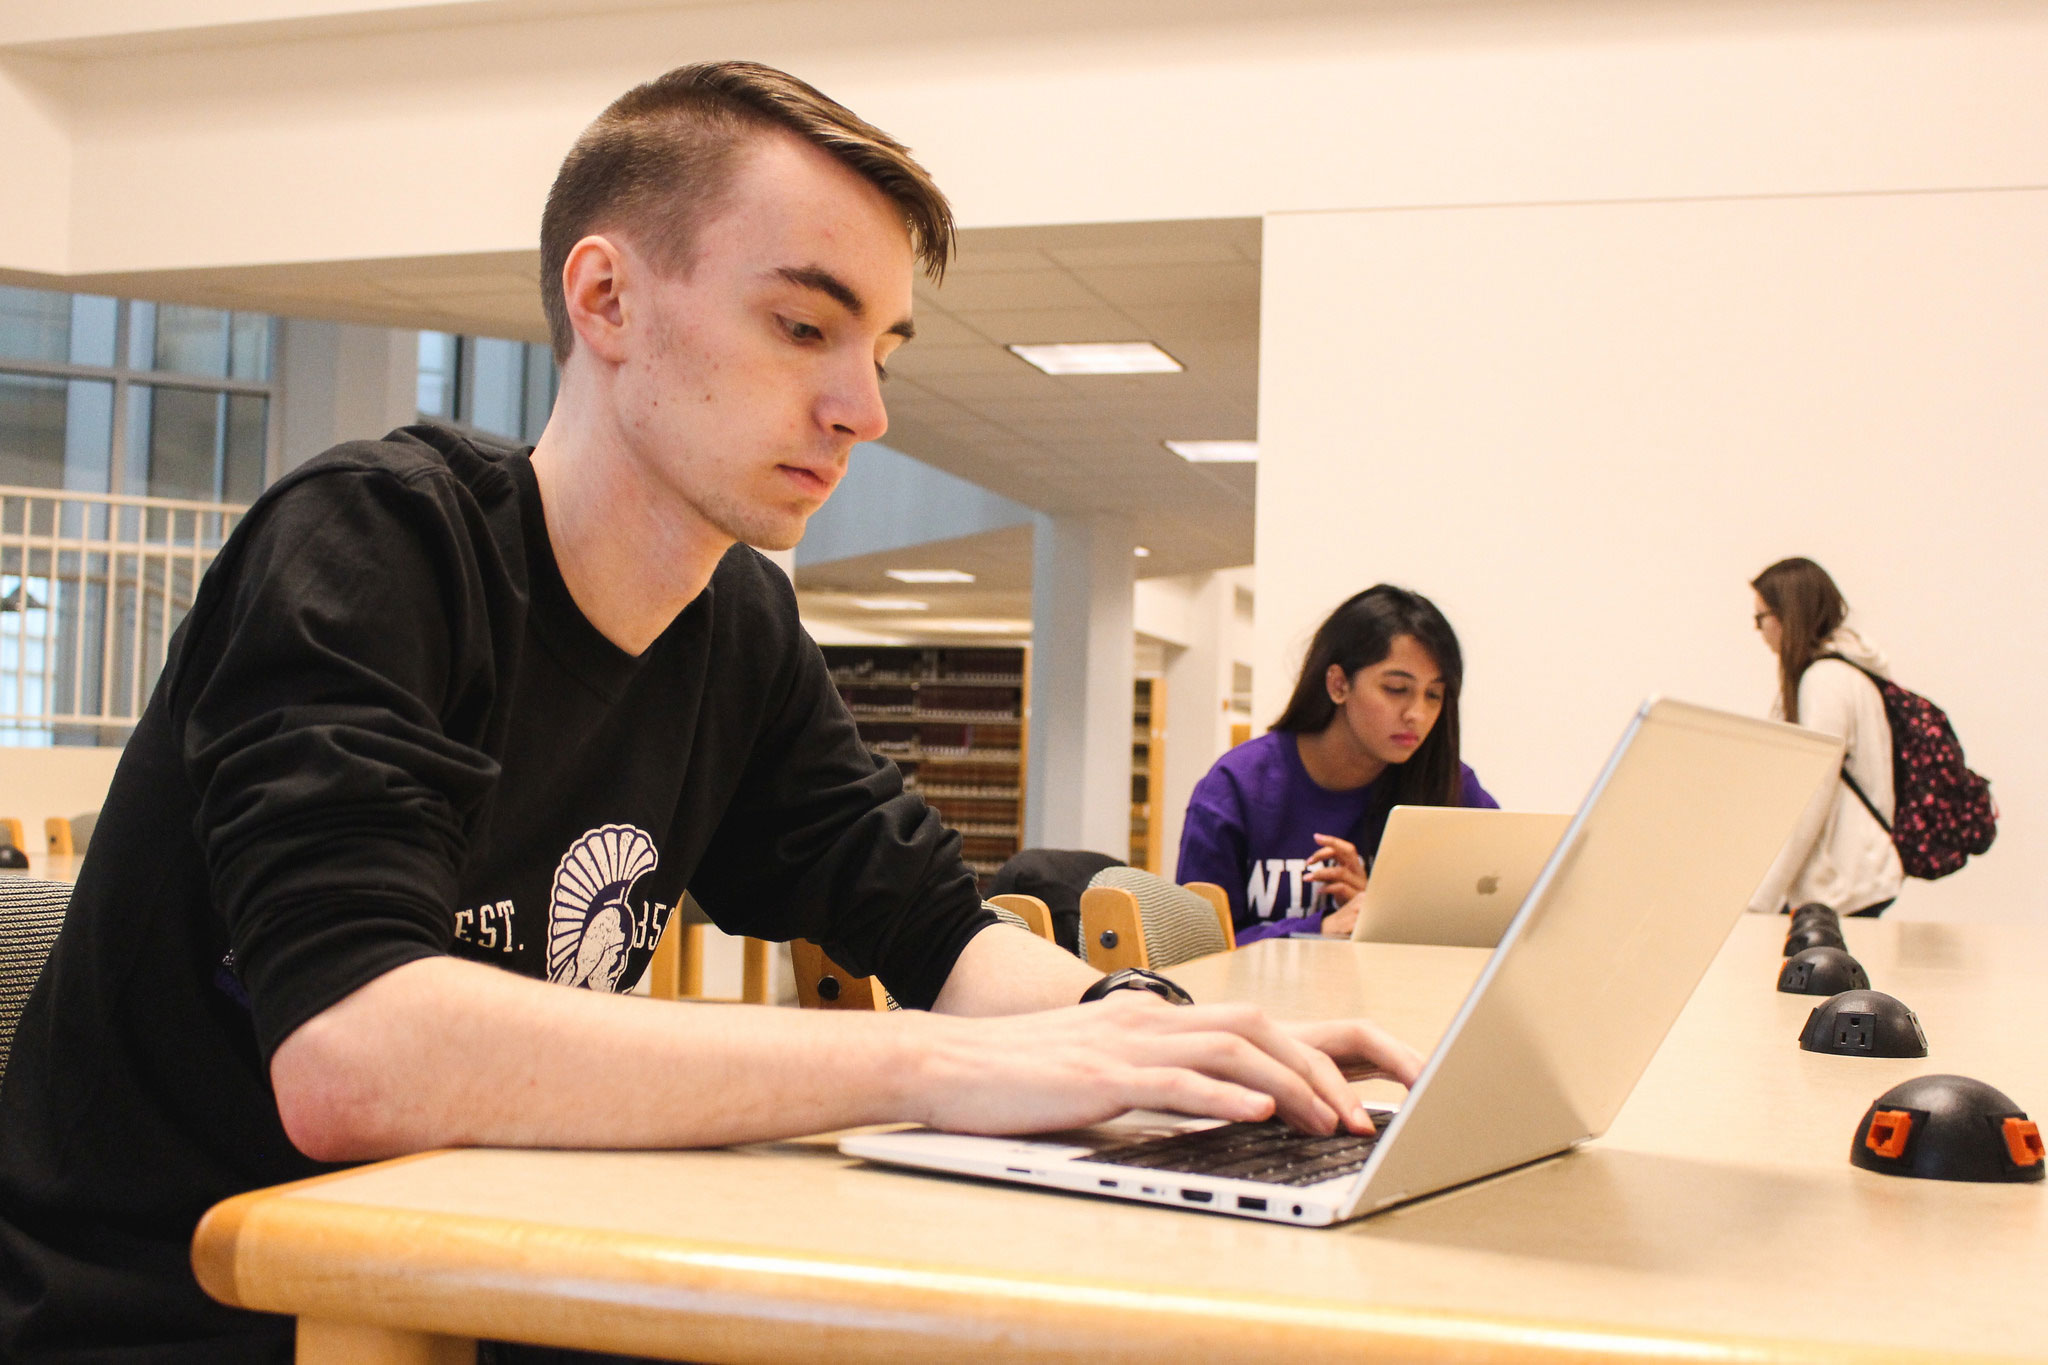 WSU student registering for scholarships on their laptop in the WSU library.